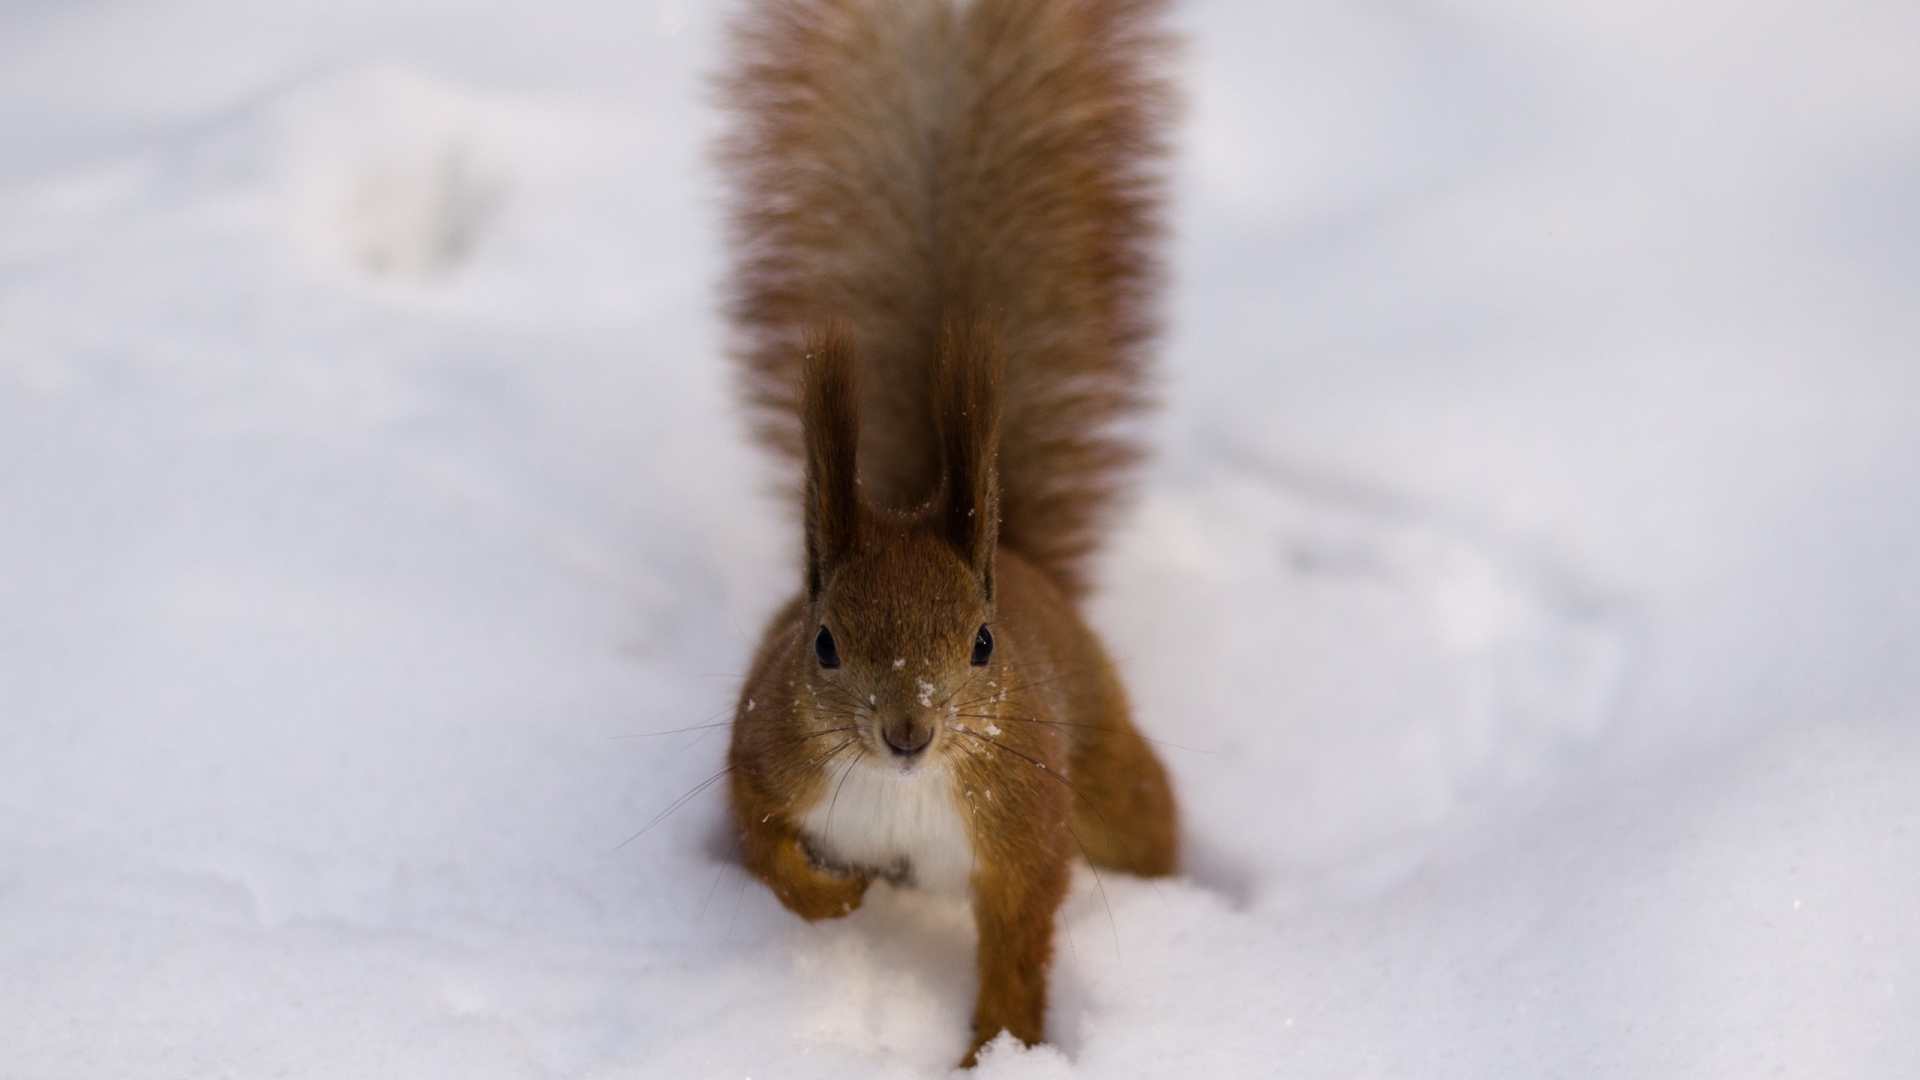 Fluffy Squirrel for 1920 x 1080 HDTV 1080p resolution